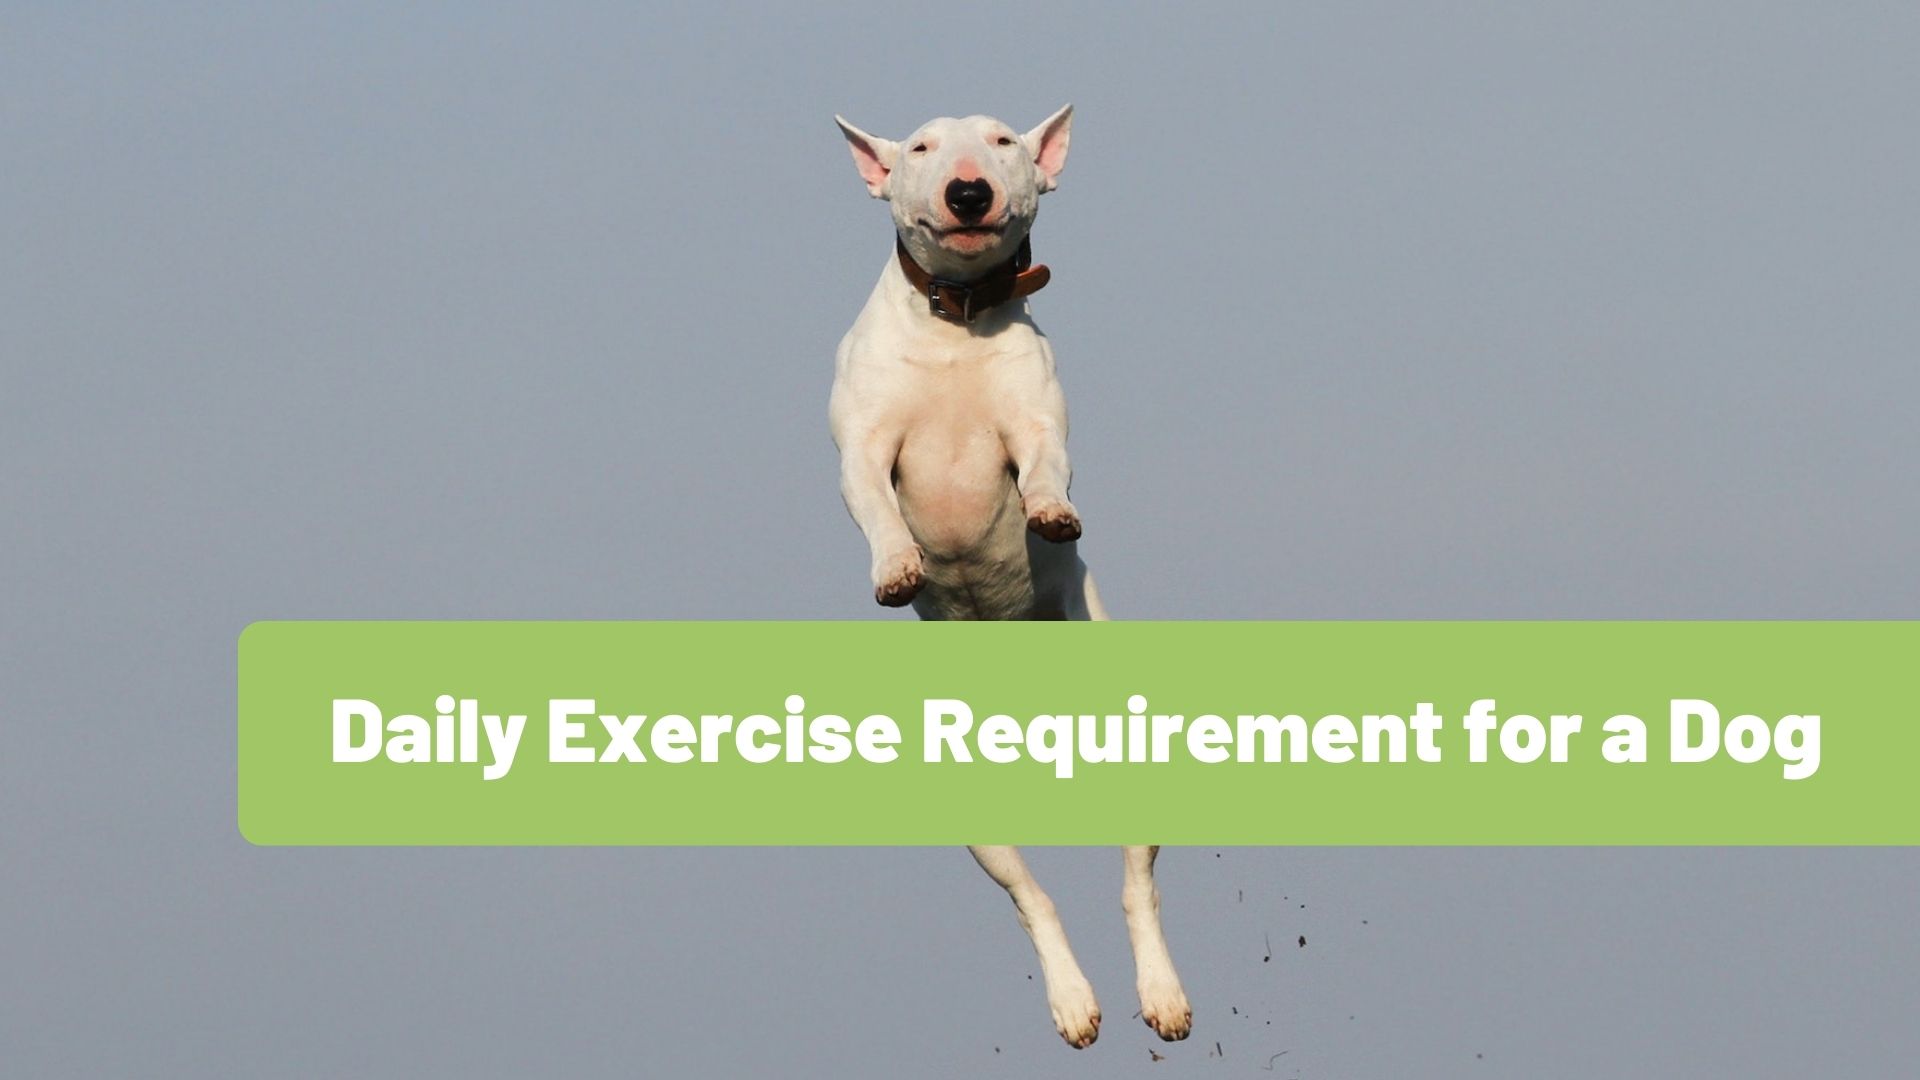 What is the Daily Exercise Requirement for a Dog - RawOrigins.pet - The Raw Dog Food Company